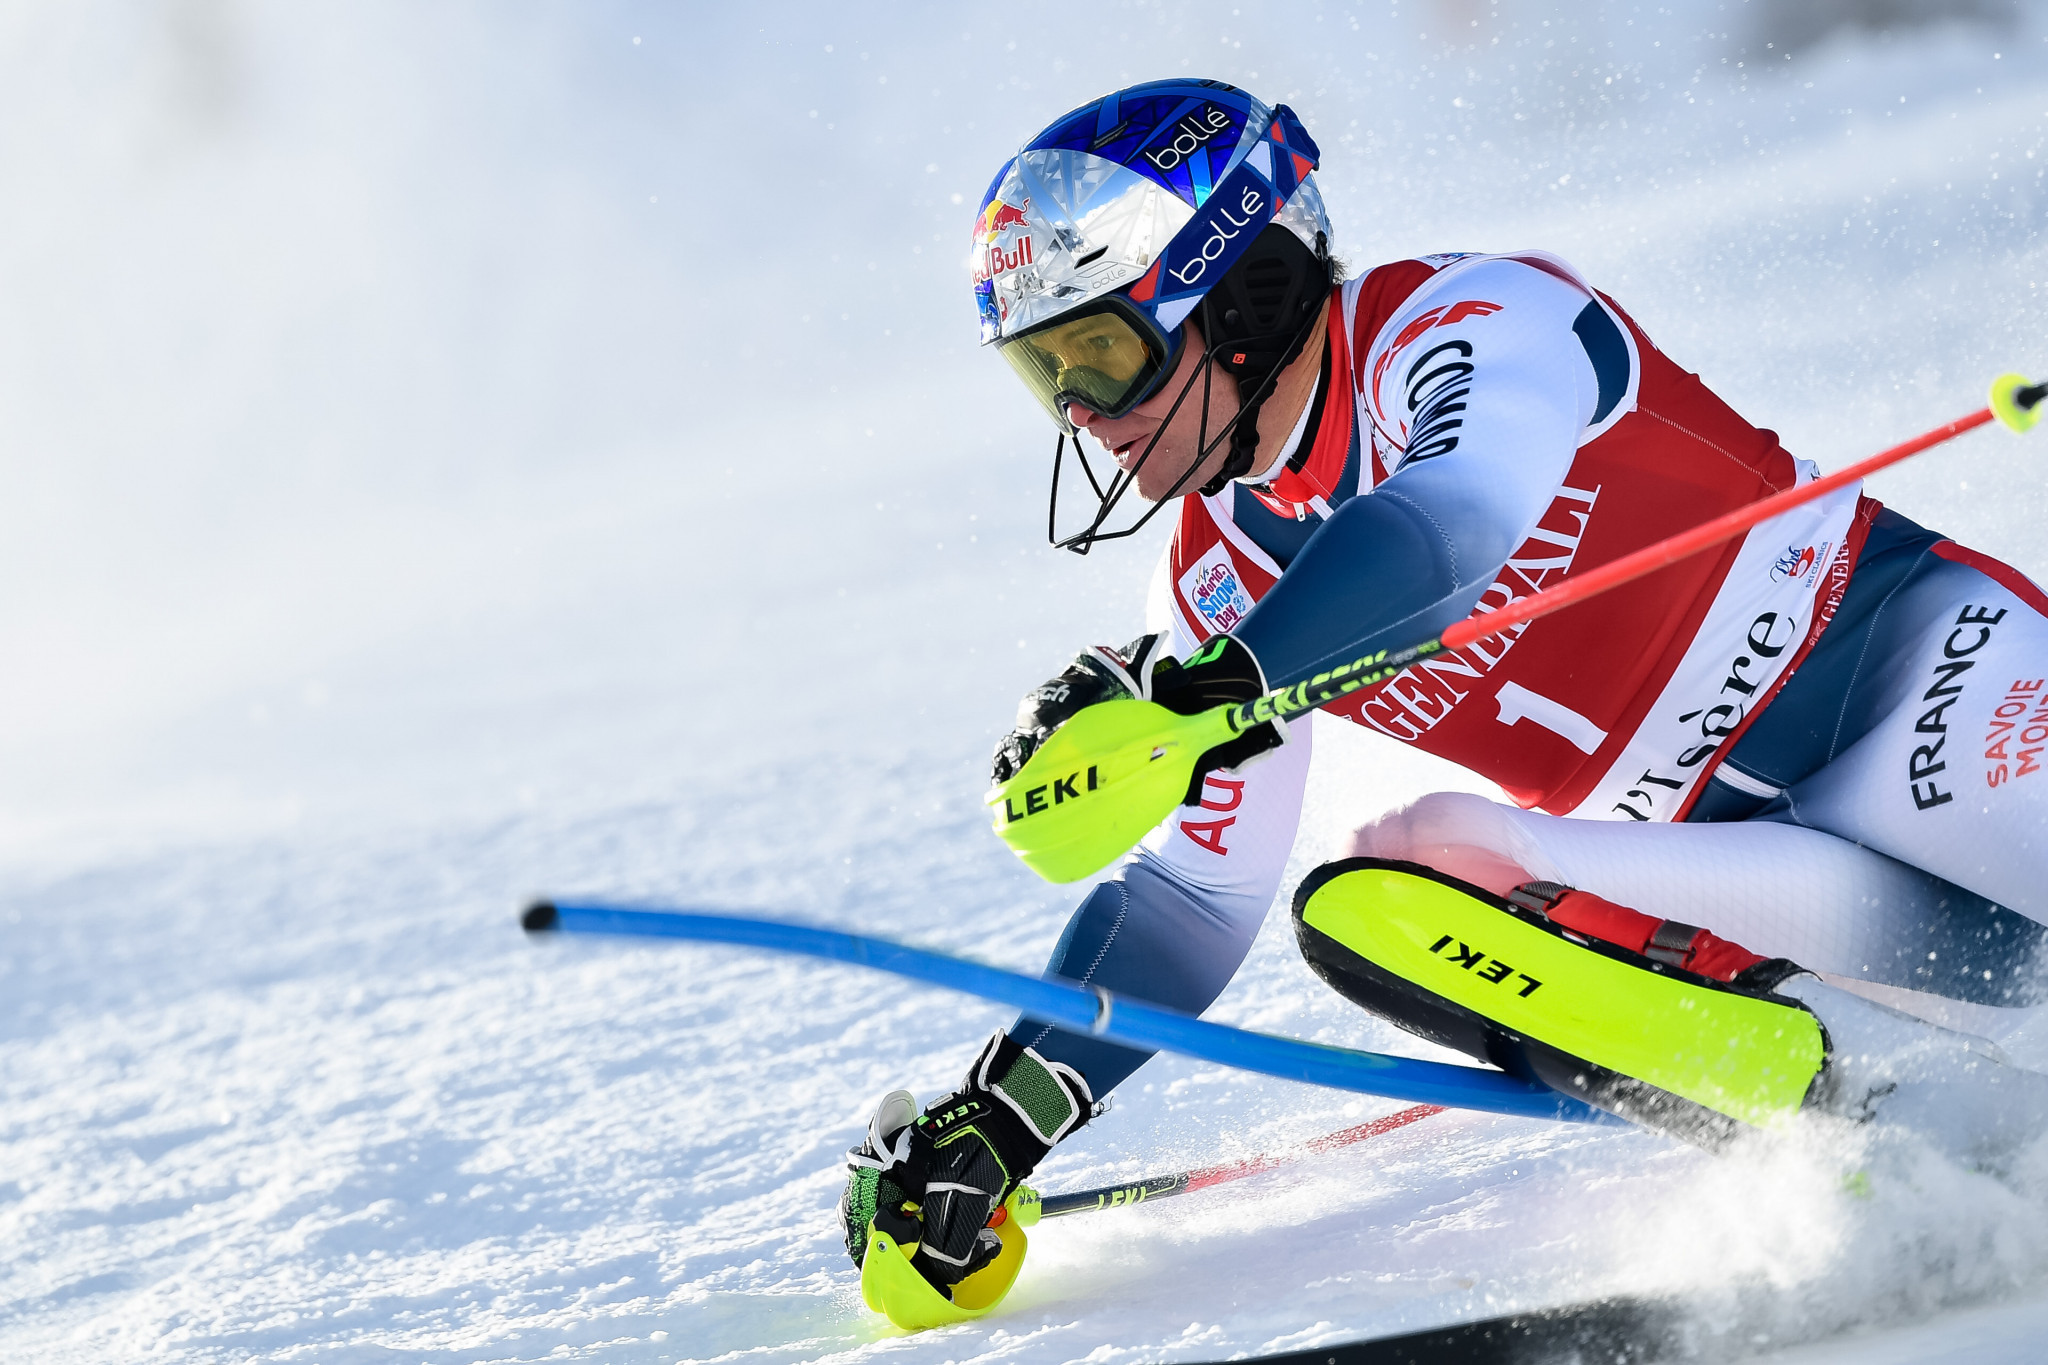 Pinturault delivers home victory in rescheduled slalom at FIS Alpine Skiing World Cup